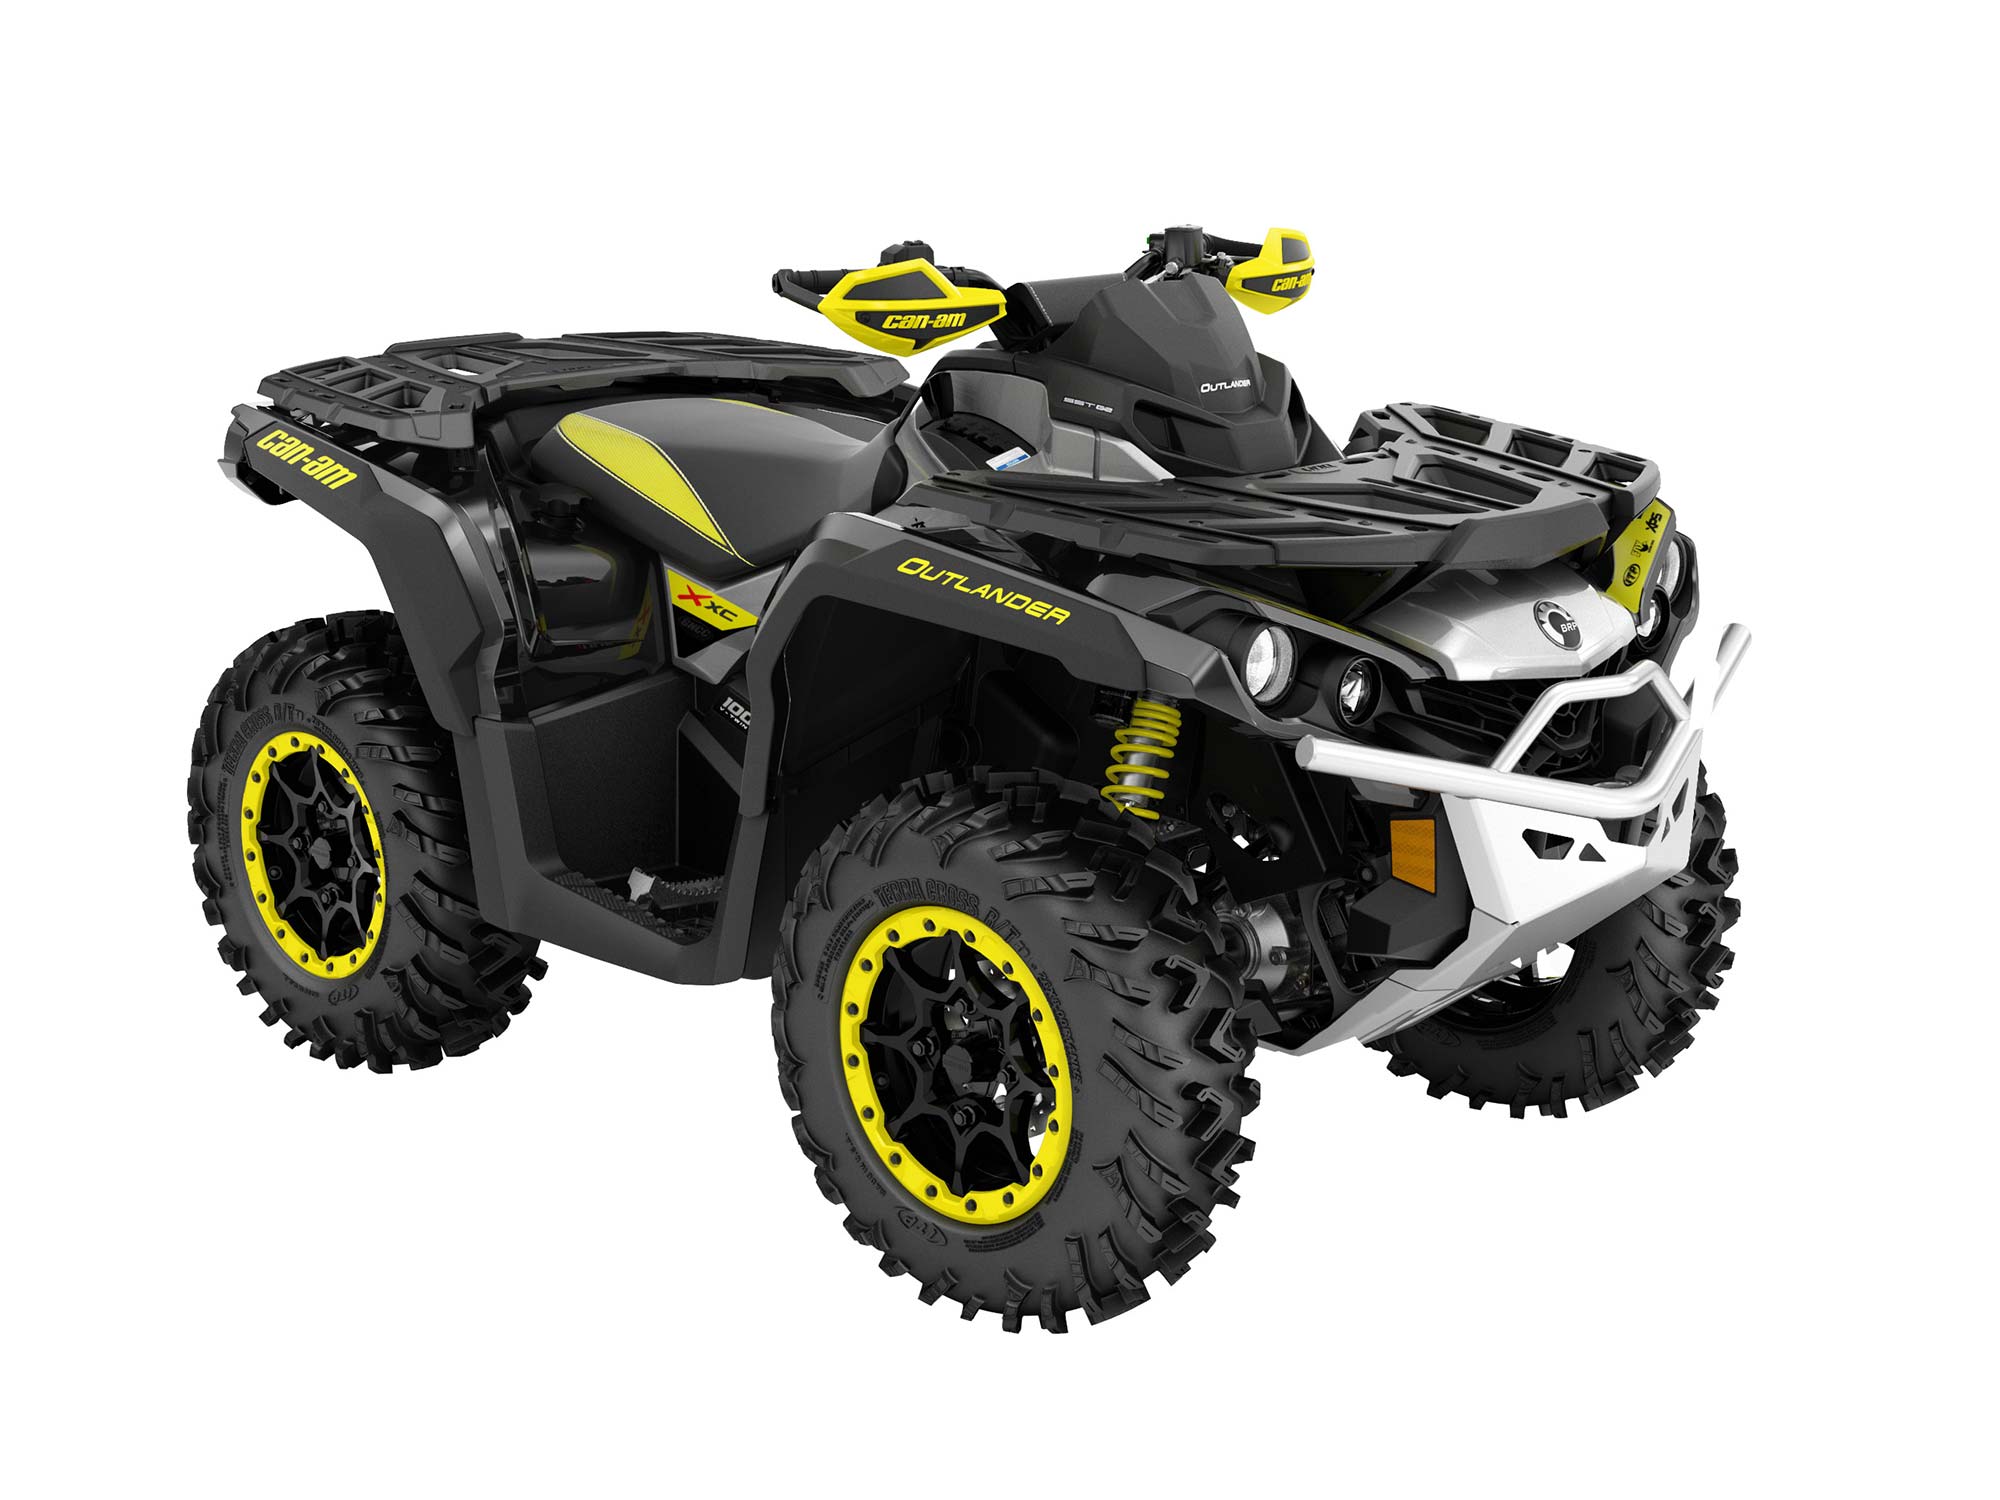 2019 Can-Am Outlander X xc 1000R Overview | ATV Rider